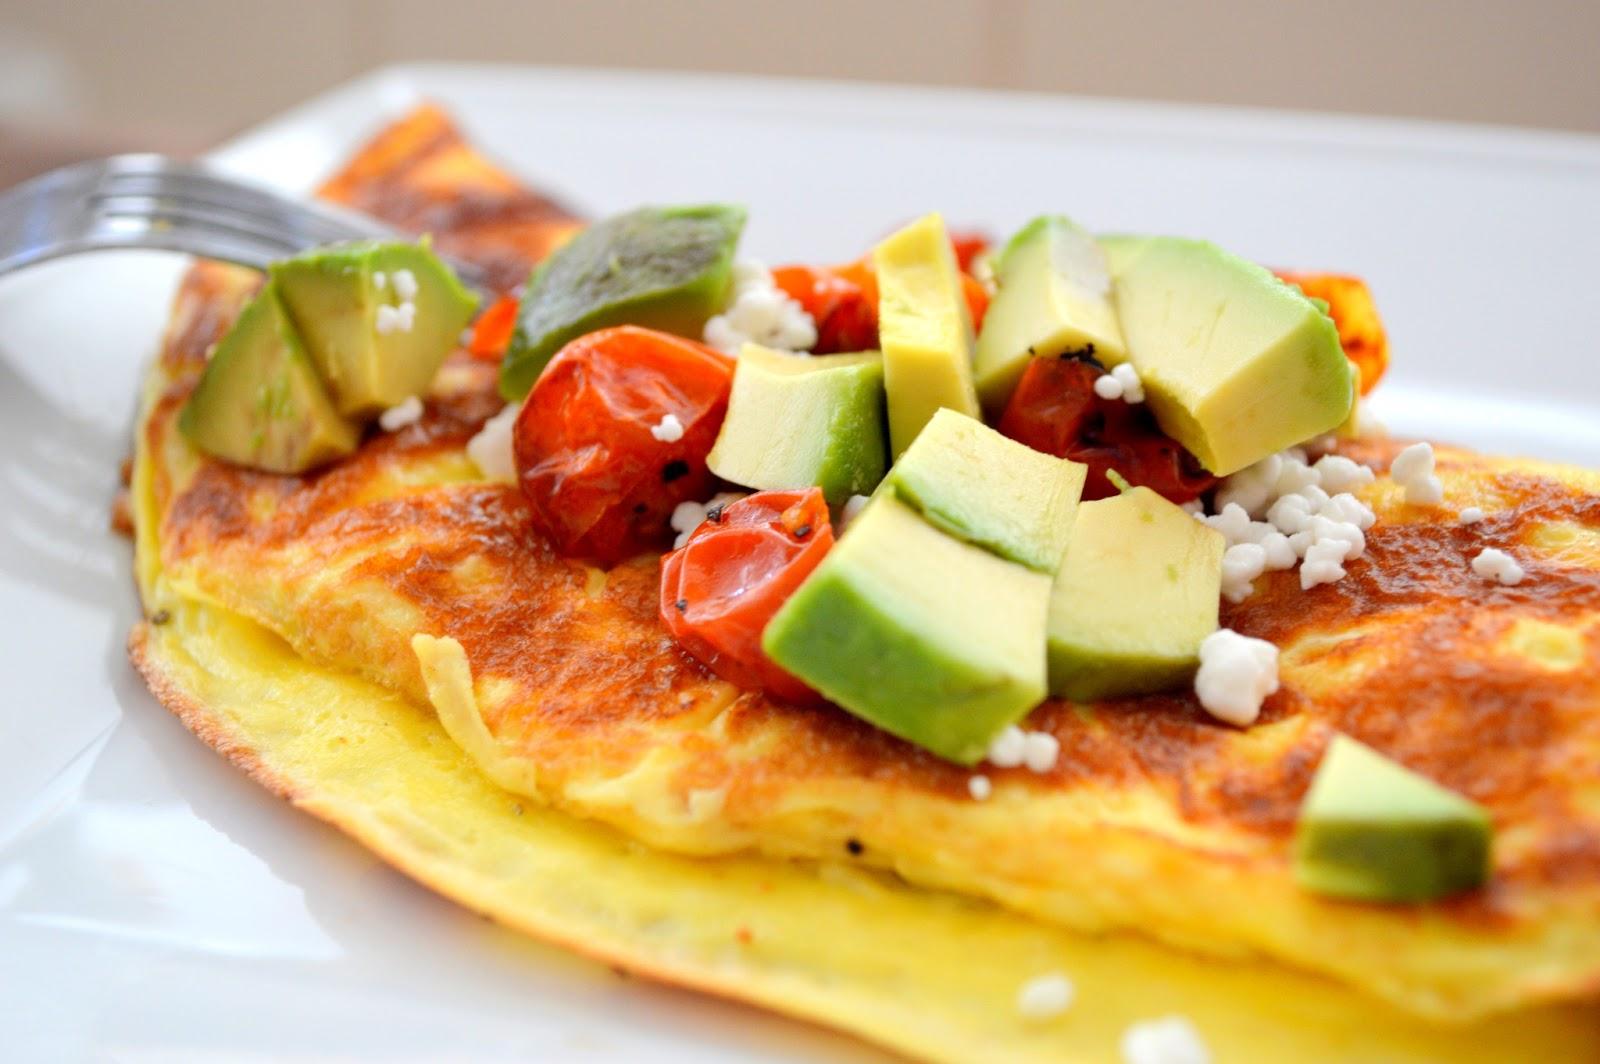 Jalapeno and Goat Cheese Omelet